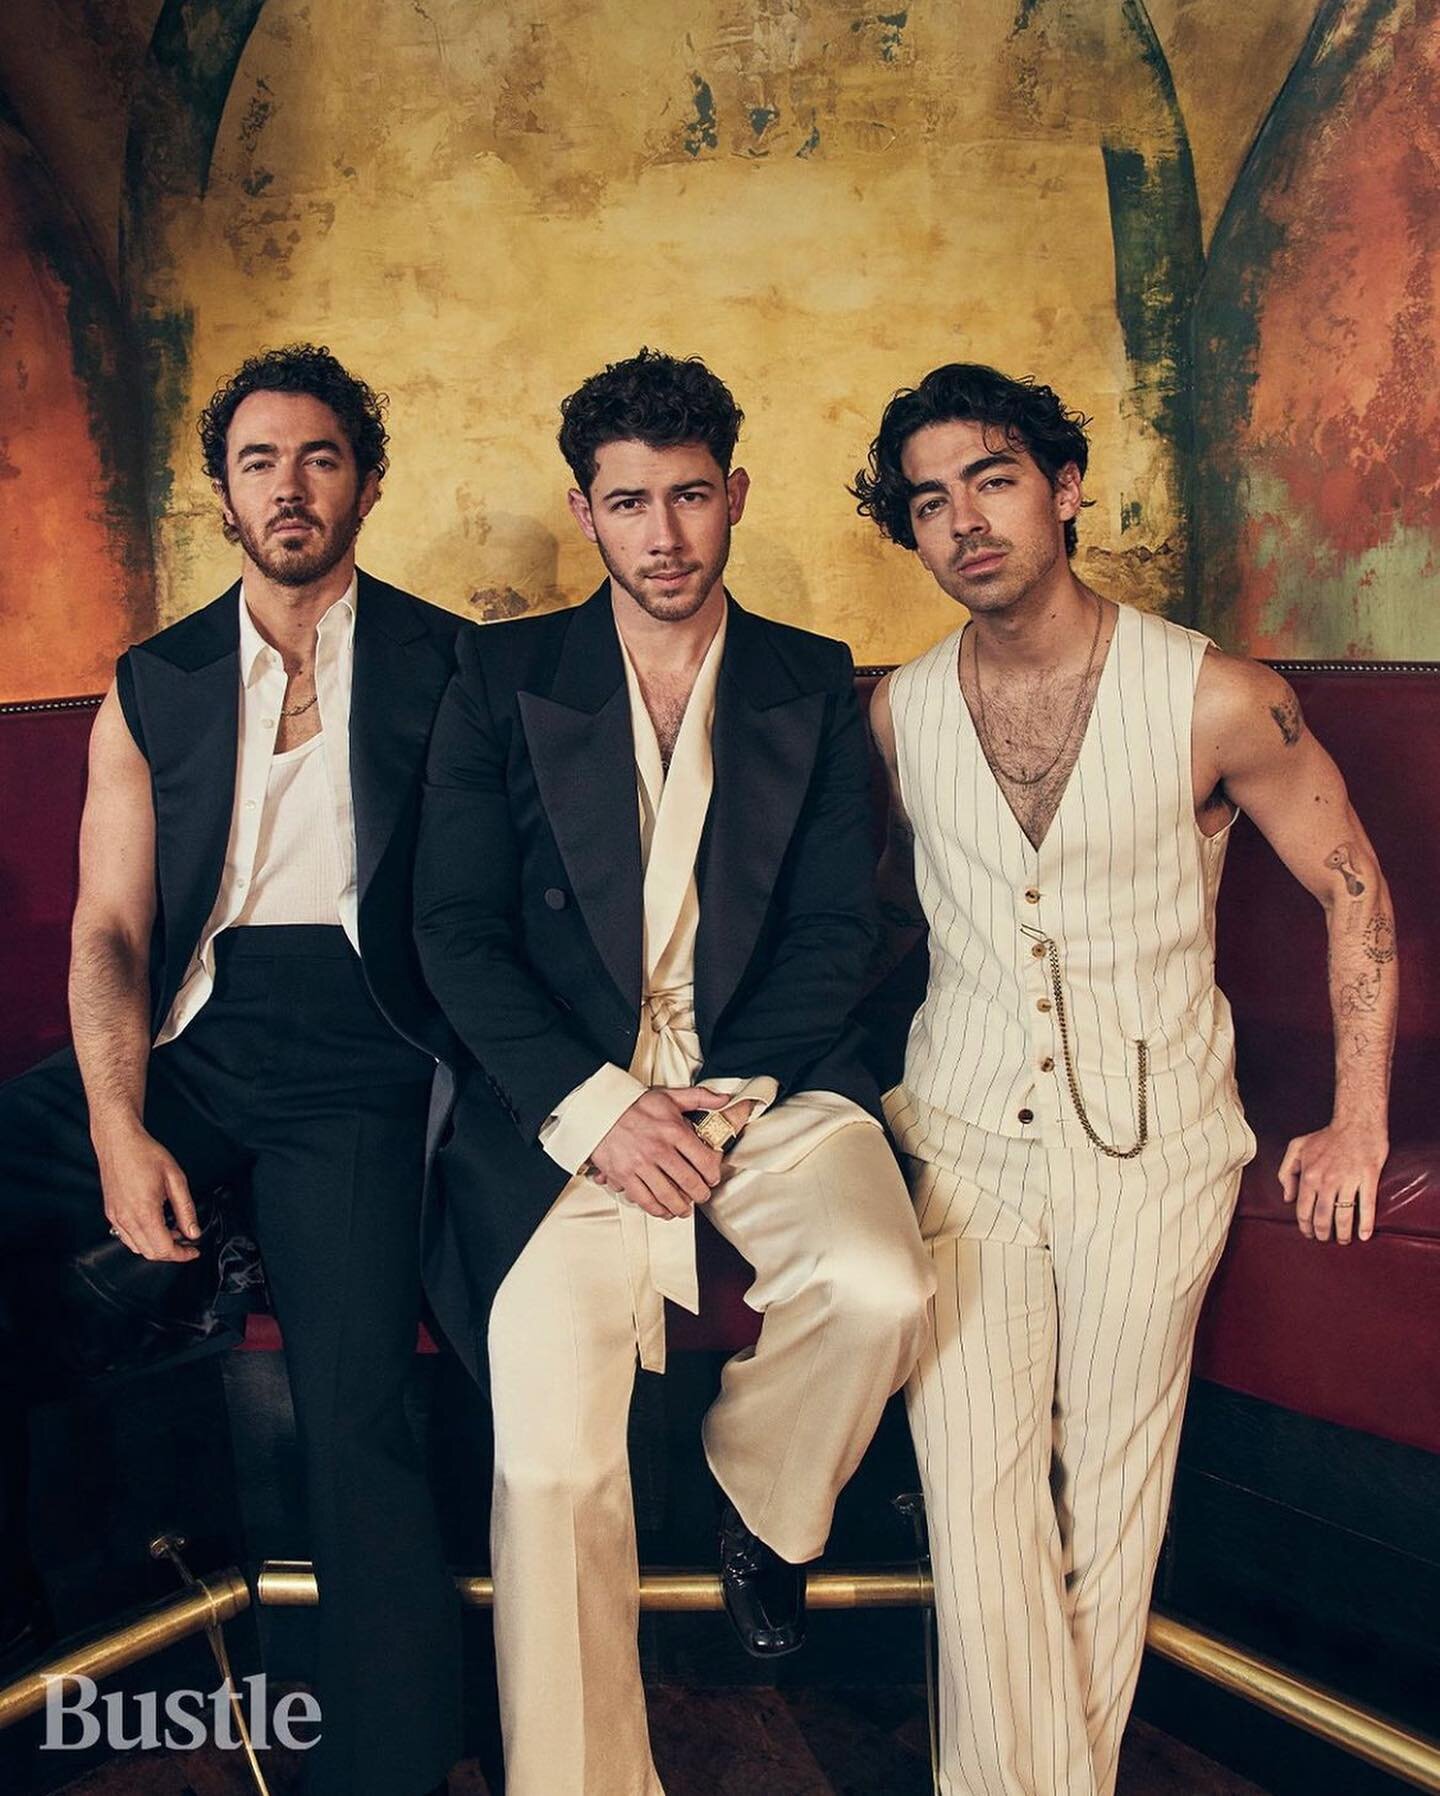 Had the pleasure of tailoring the @jonasbrothers for @bustle Magazines May cover! Thank you to the incredible Bustle team for having me! 

Photographer: @Beaugrealy
Stylist: @eehay @sydneylopez
Grooming: @kumicraig
Tailoring: @kerryphelandesigns 
Tal